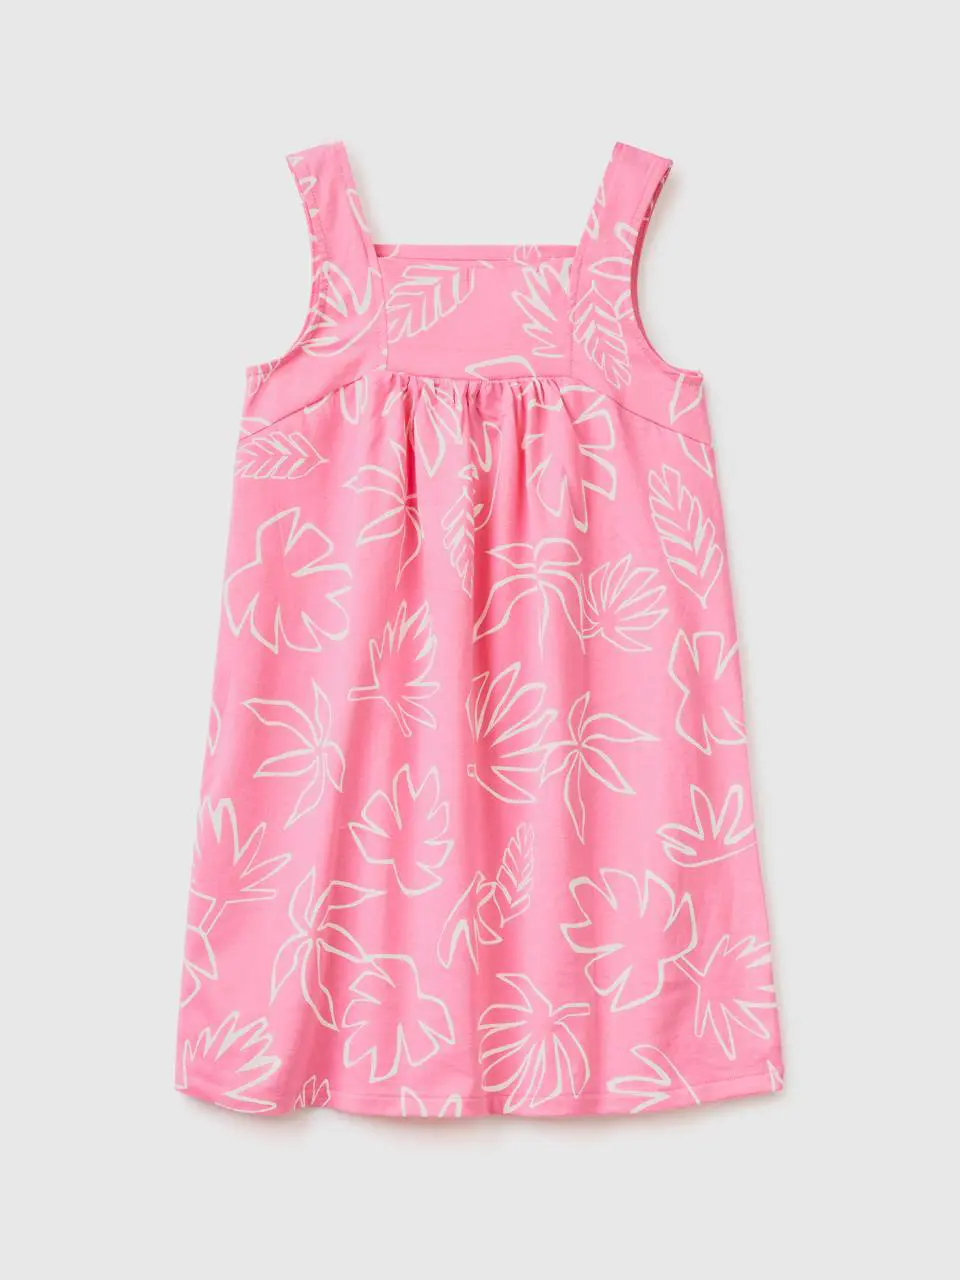 Benetton printed dress in pure cotton. 1